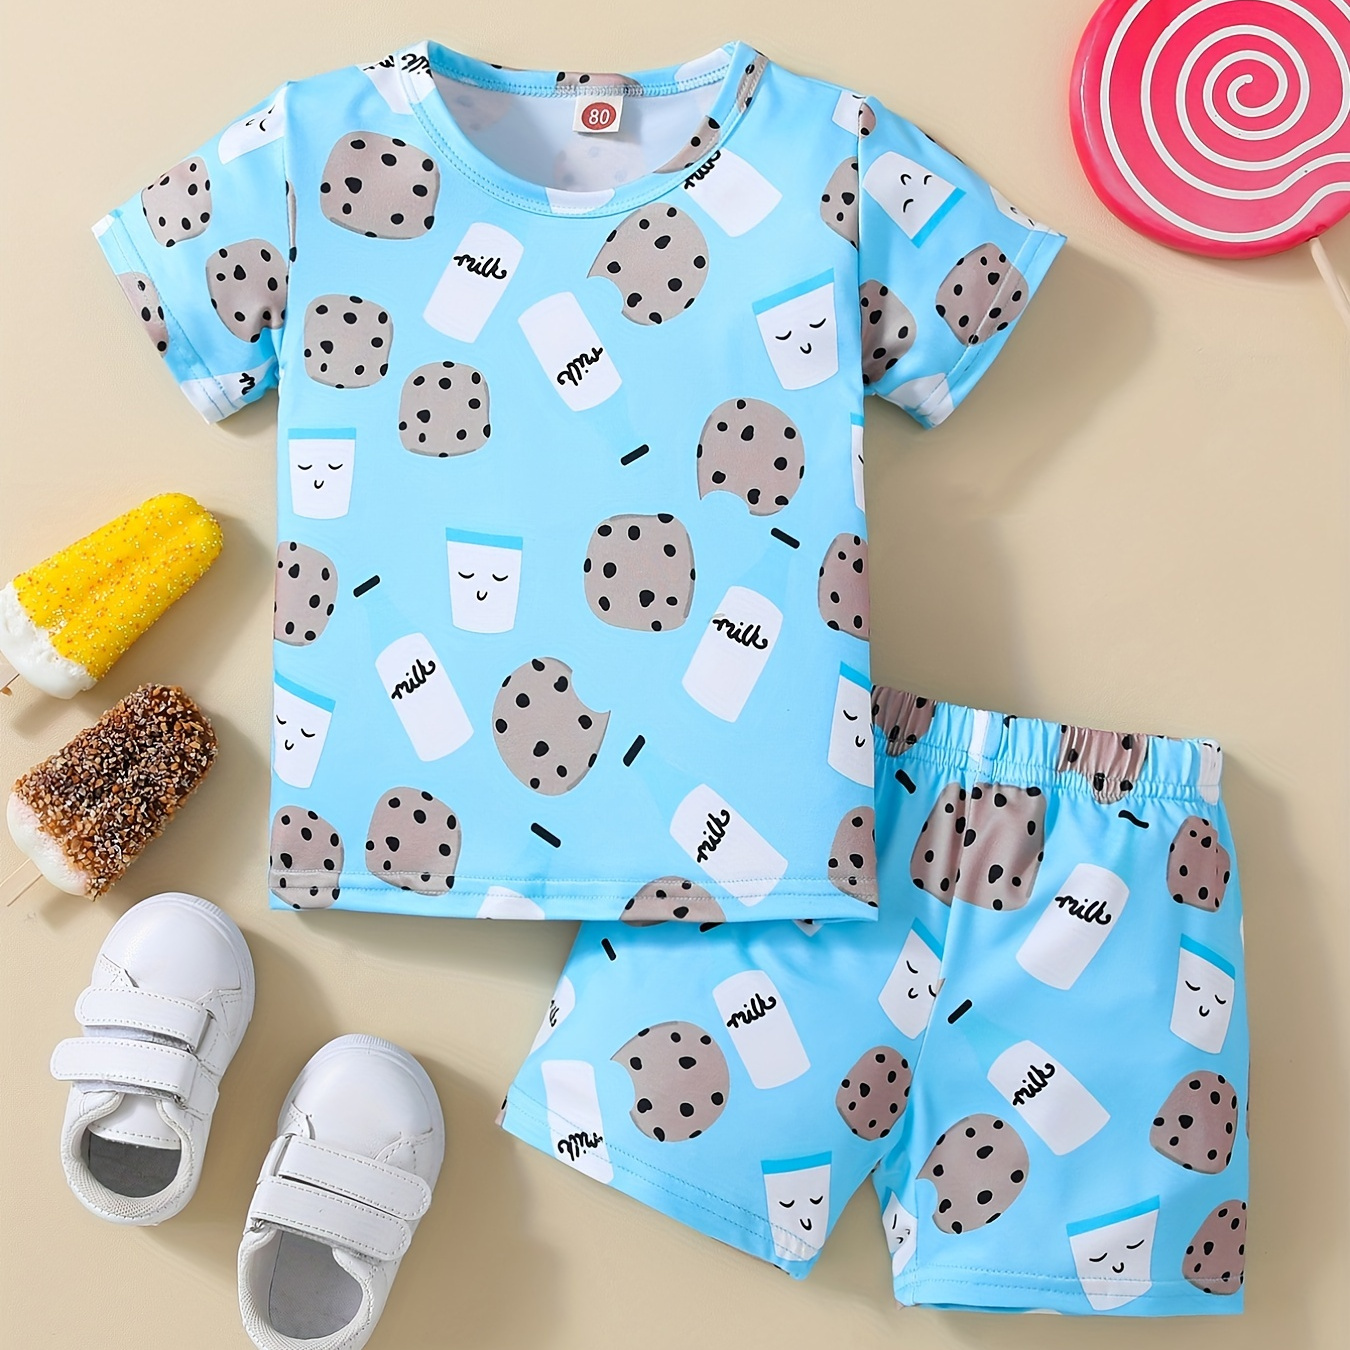 

Boys Cartoon Biscuit And Milk Outfit Shorts & T-shirt Short Sleeves Crew Neck Casual Summer Kids Clothes